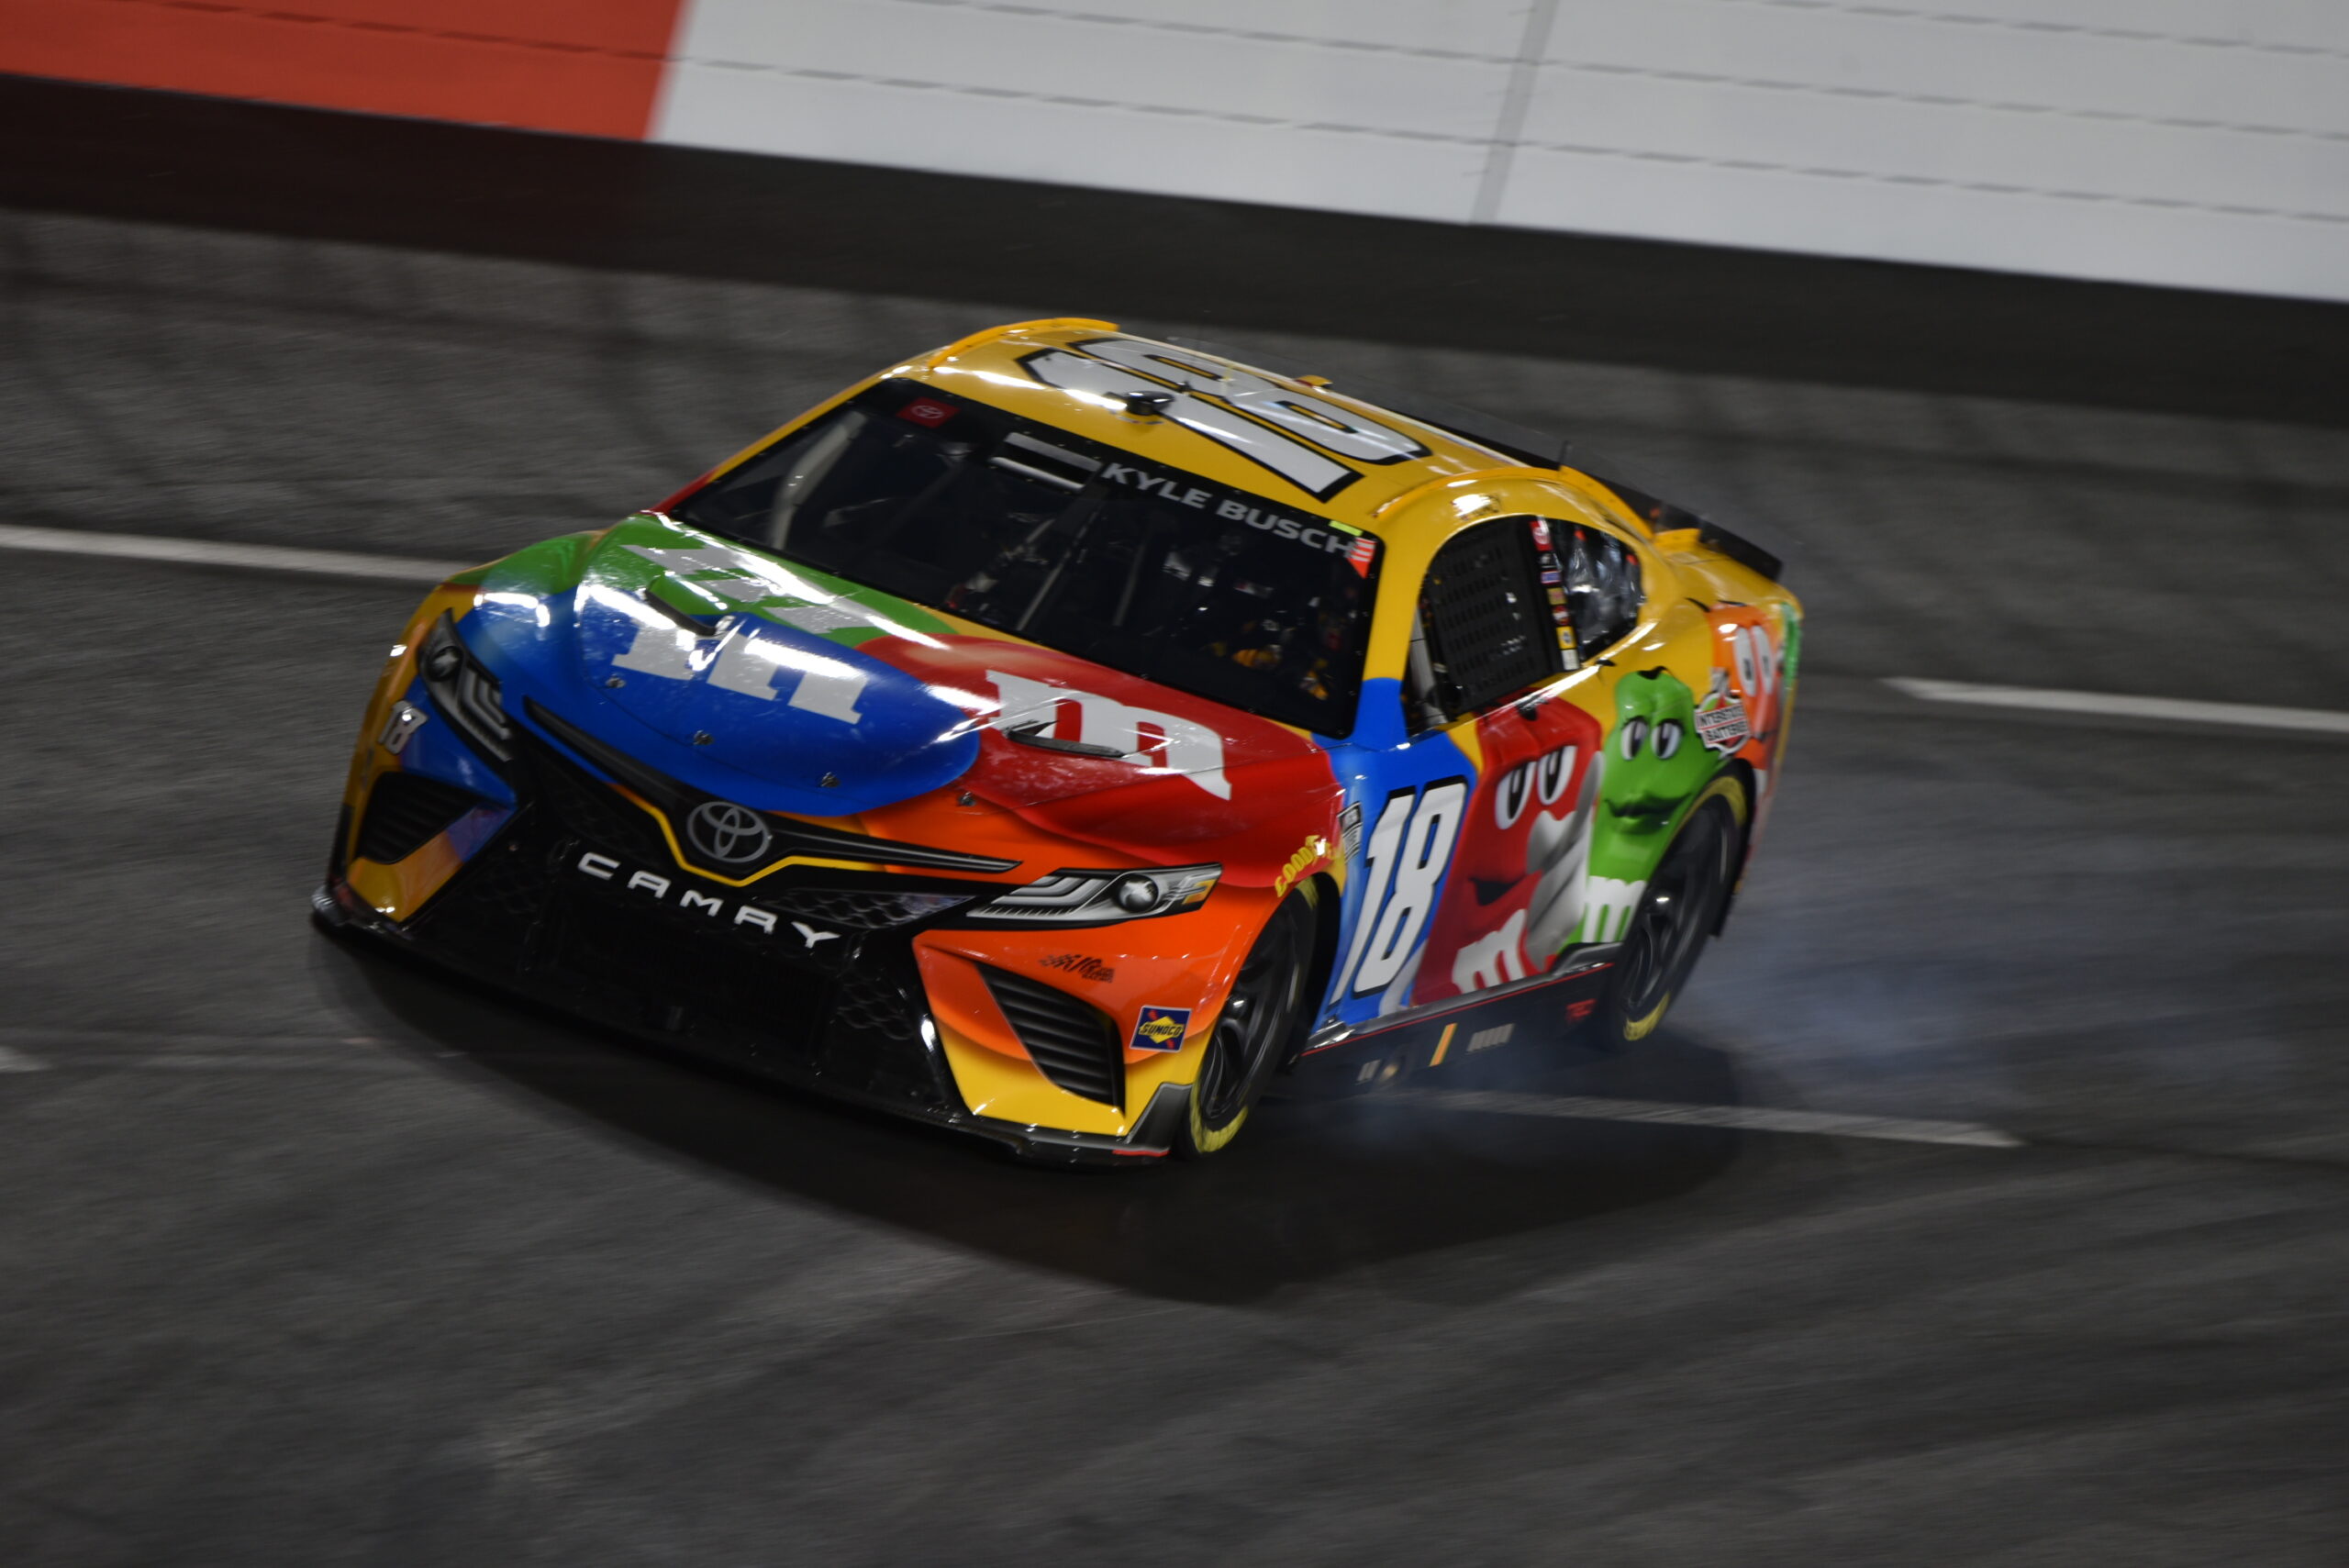 Kyle Busch, Reddick, Haley and Logano to Lead Their Clash Heat Races